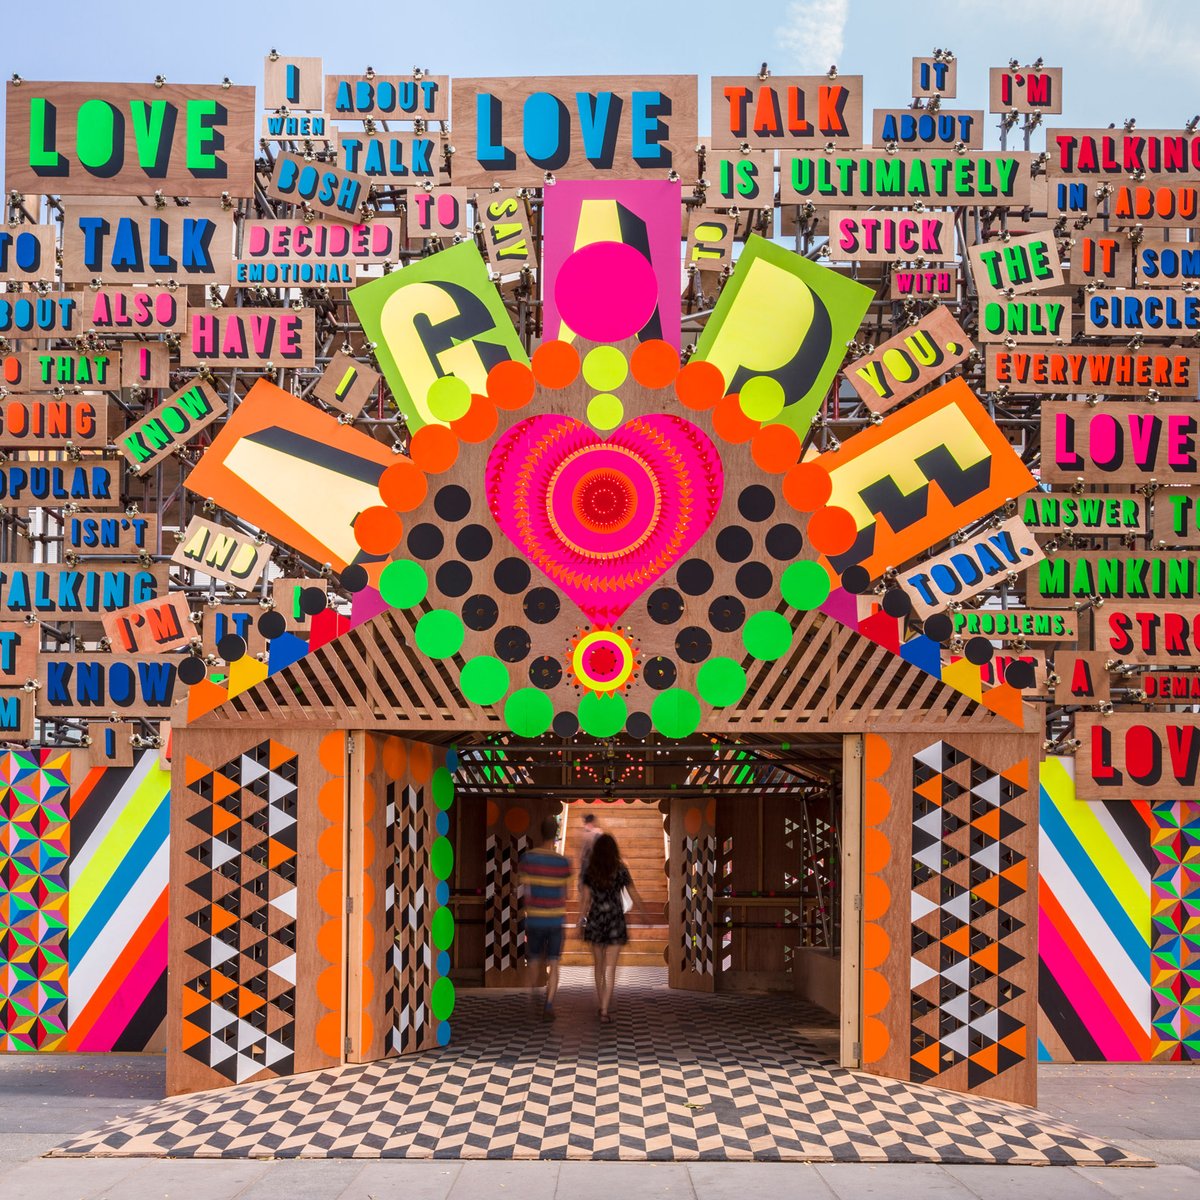 Designer Adam Nathaniel Furman has picked out 10 projects that represent the New London Fabulous movement of 'designers who resolutely seek out beauty, complexity and joy' 😎 dezeen.com/2020/06/05/col… #NewLondonFabulous #architecture #design #London #inspiration #travelbloggers